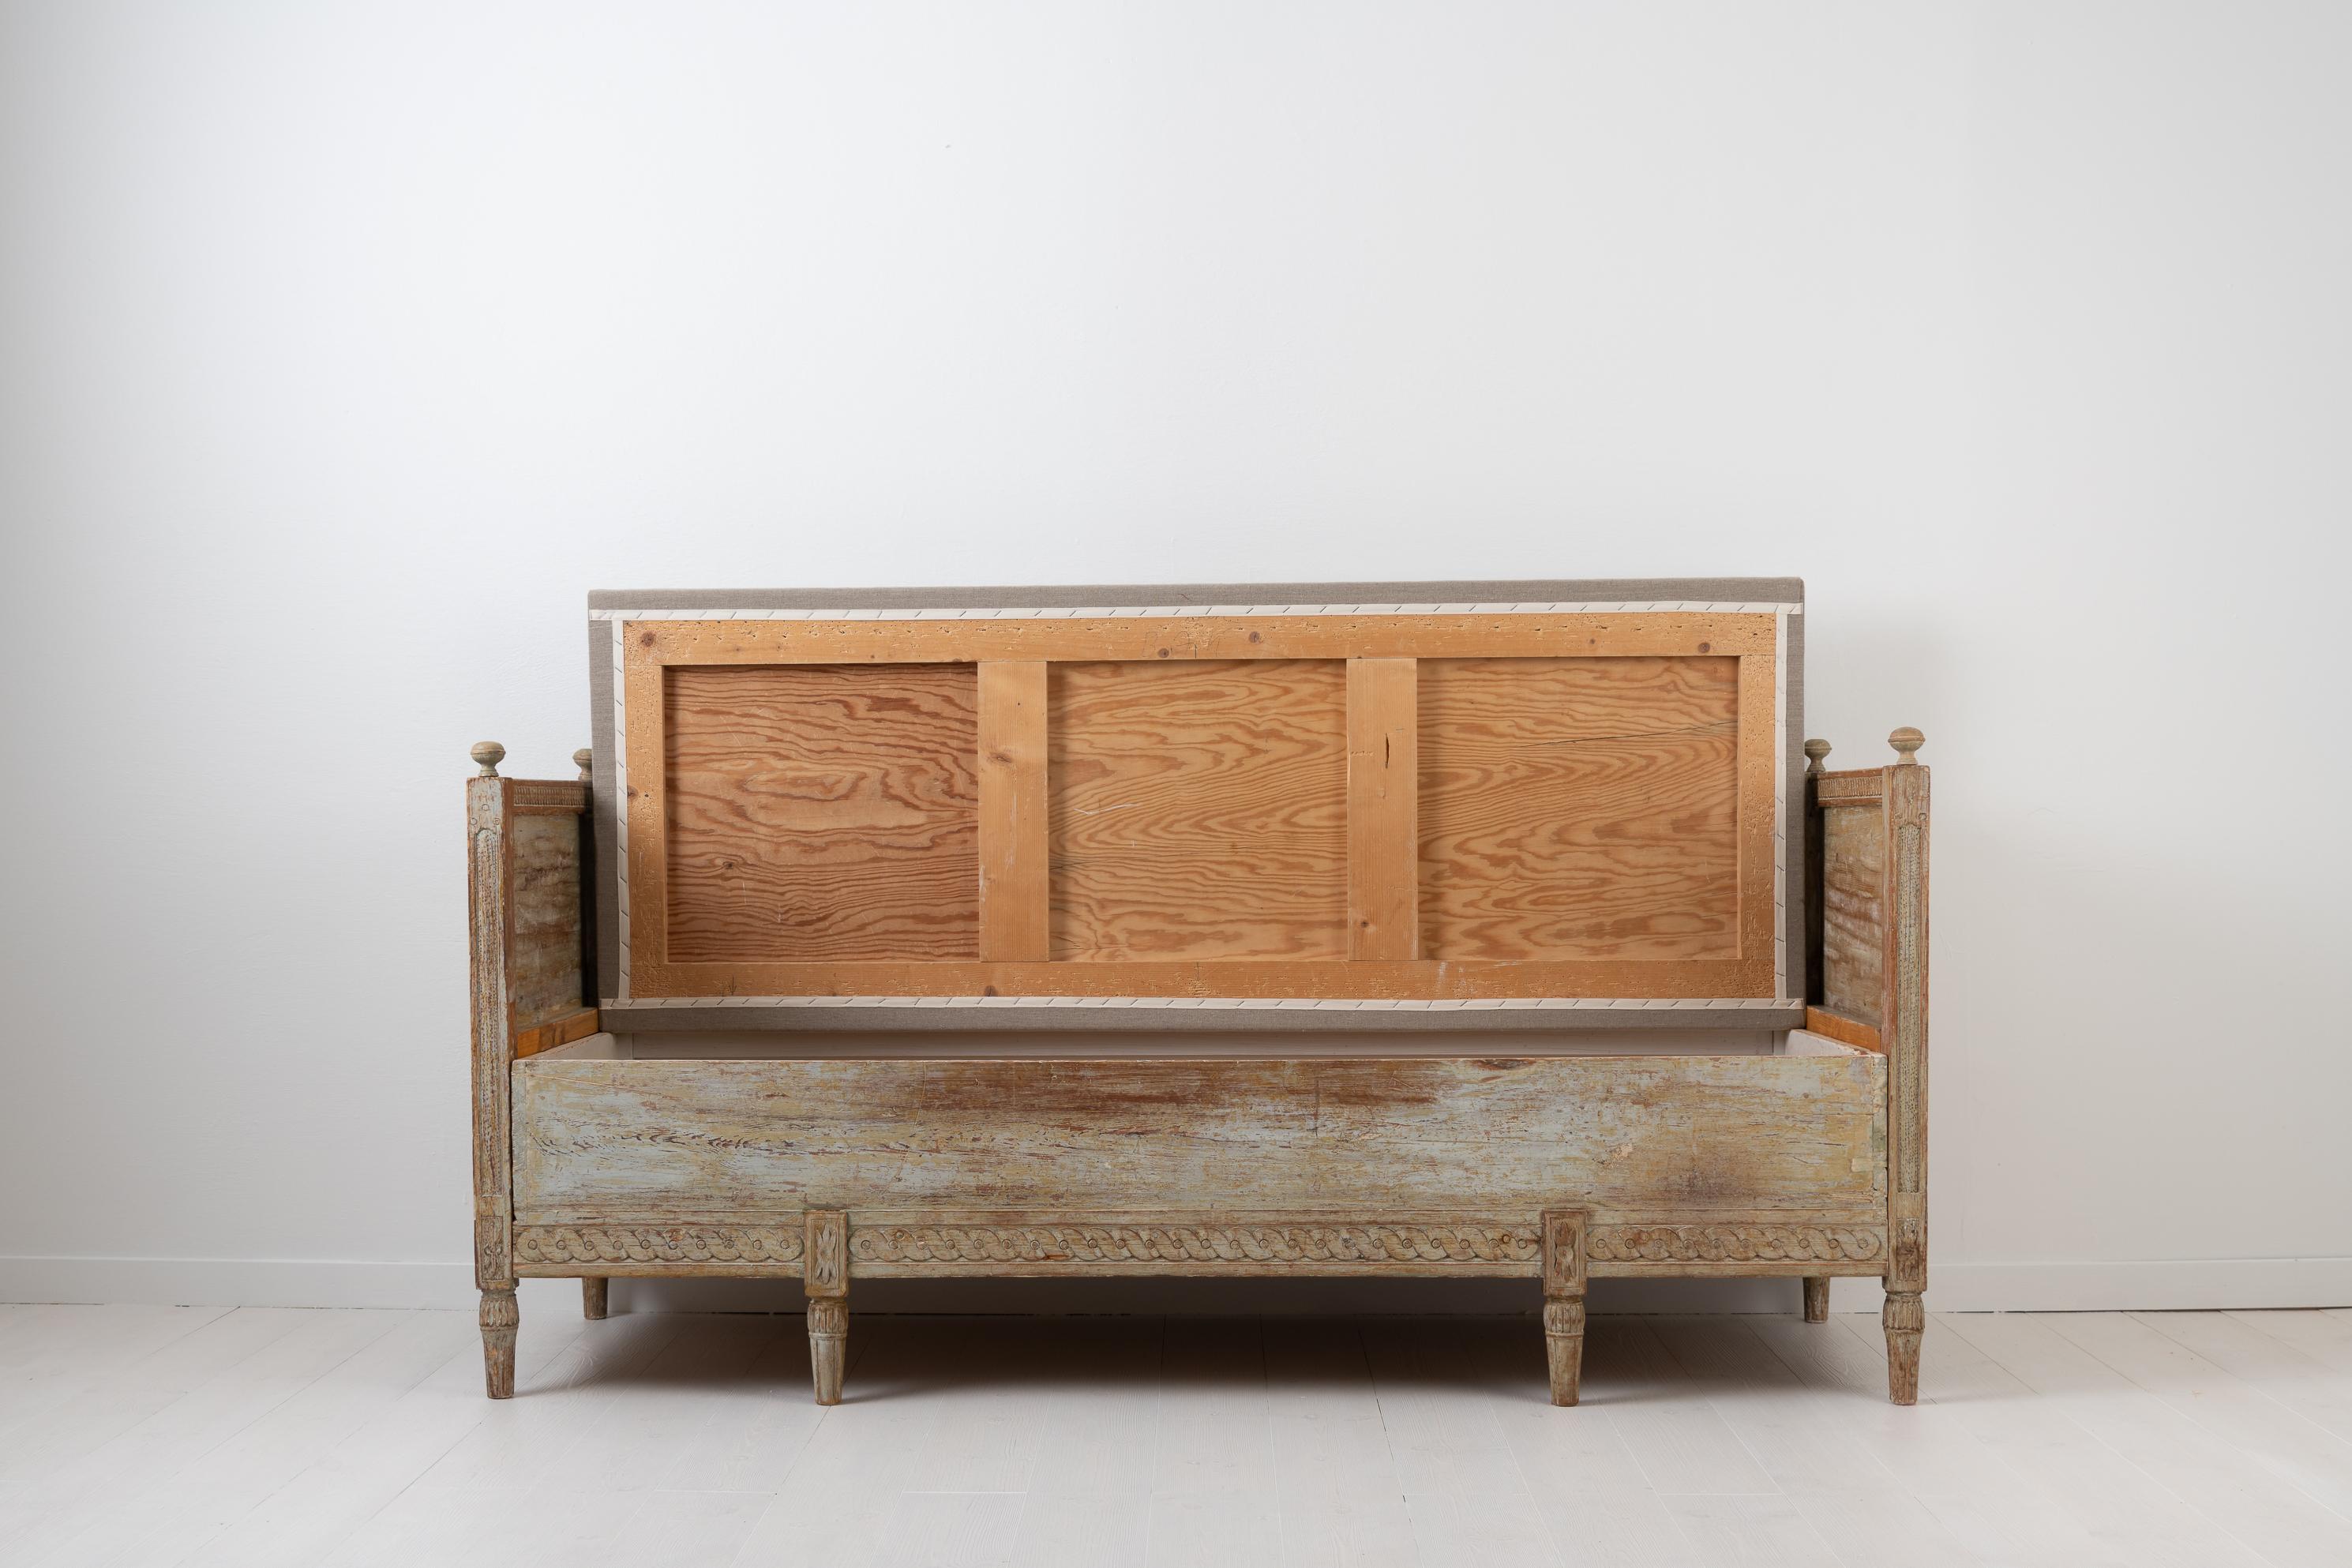 Swedish Antique Neoclassical Sofa from Northern Sweden